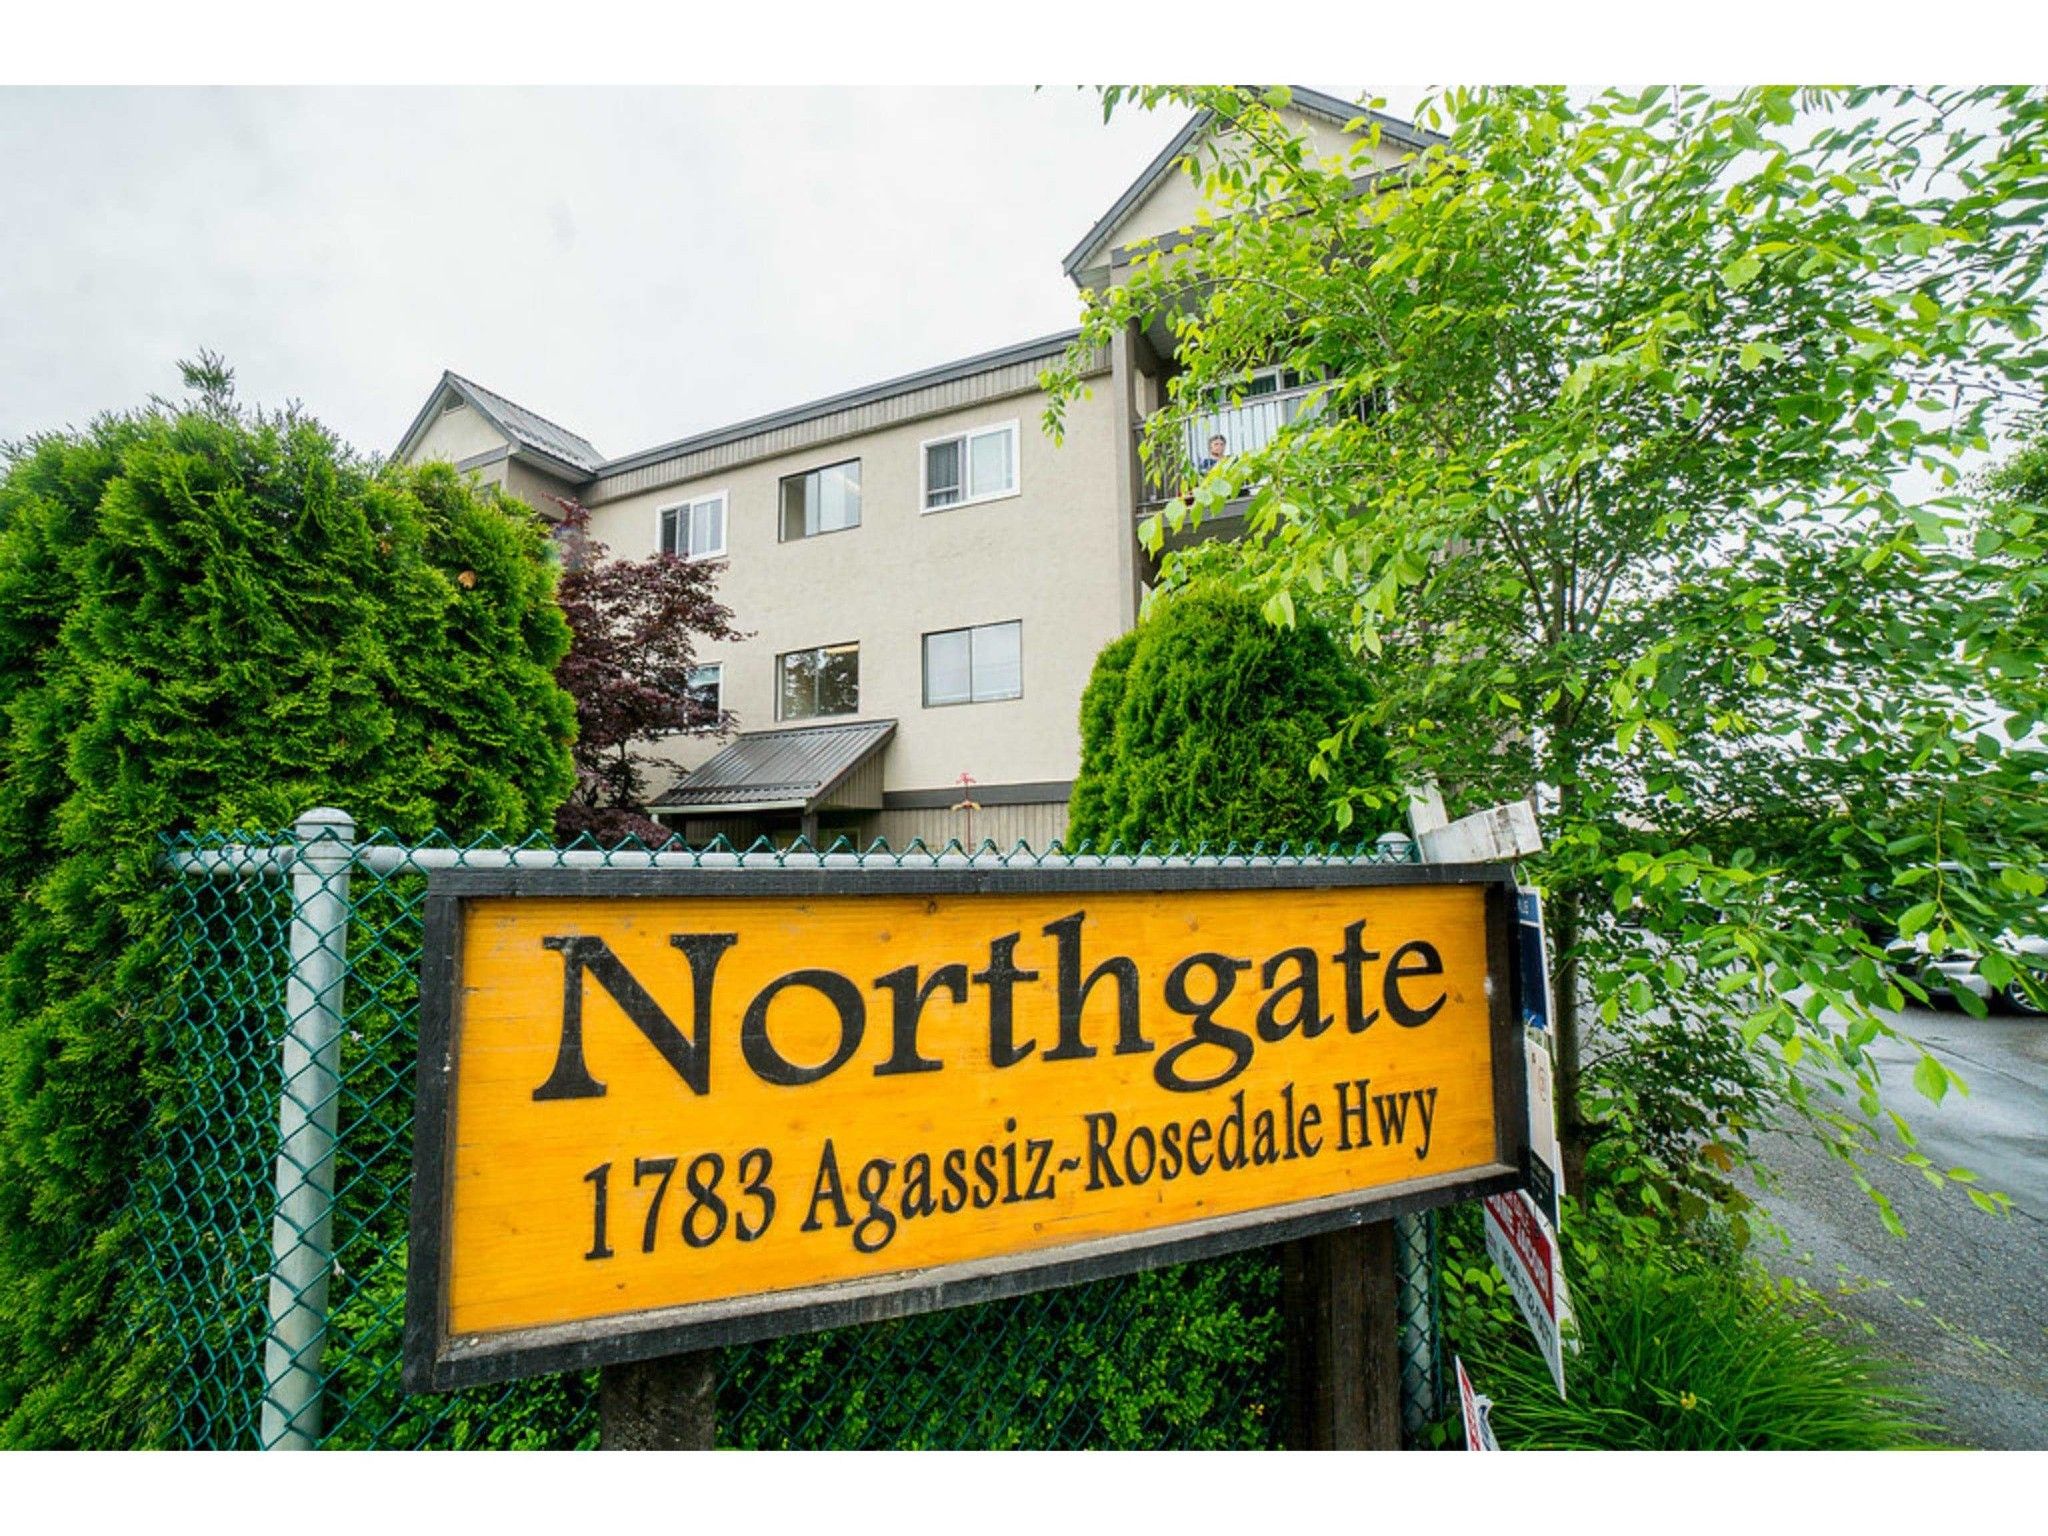 New property listed in Agassiz